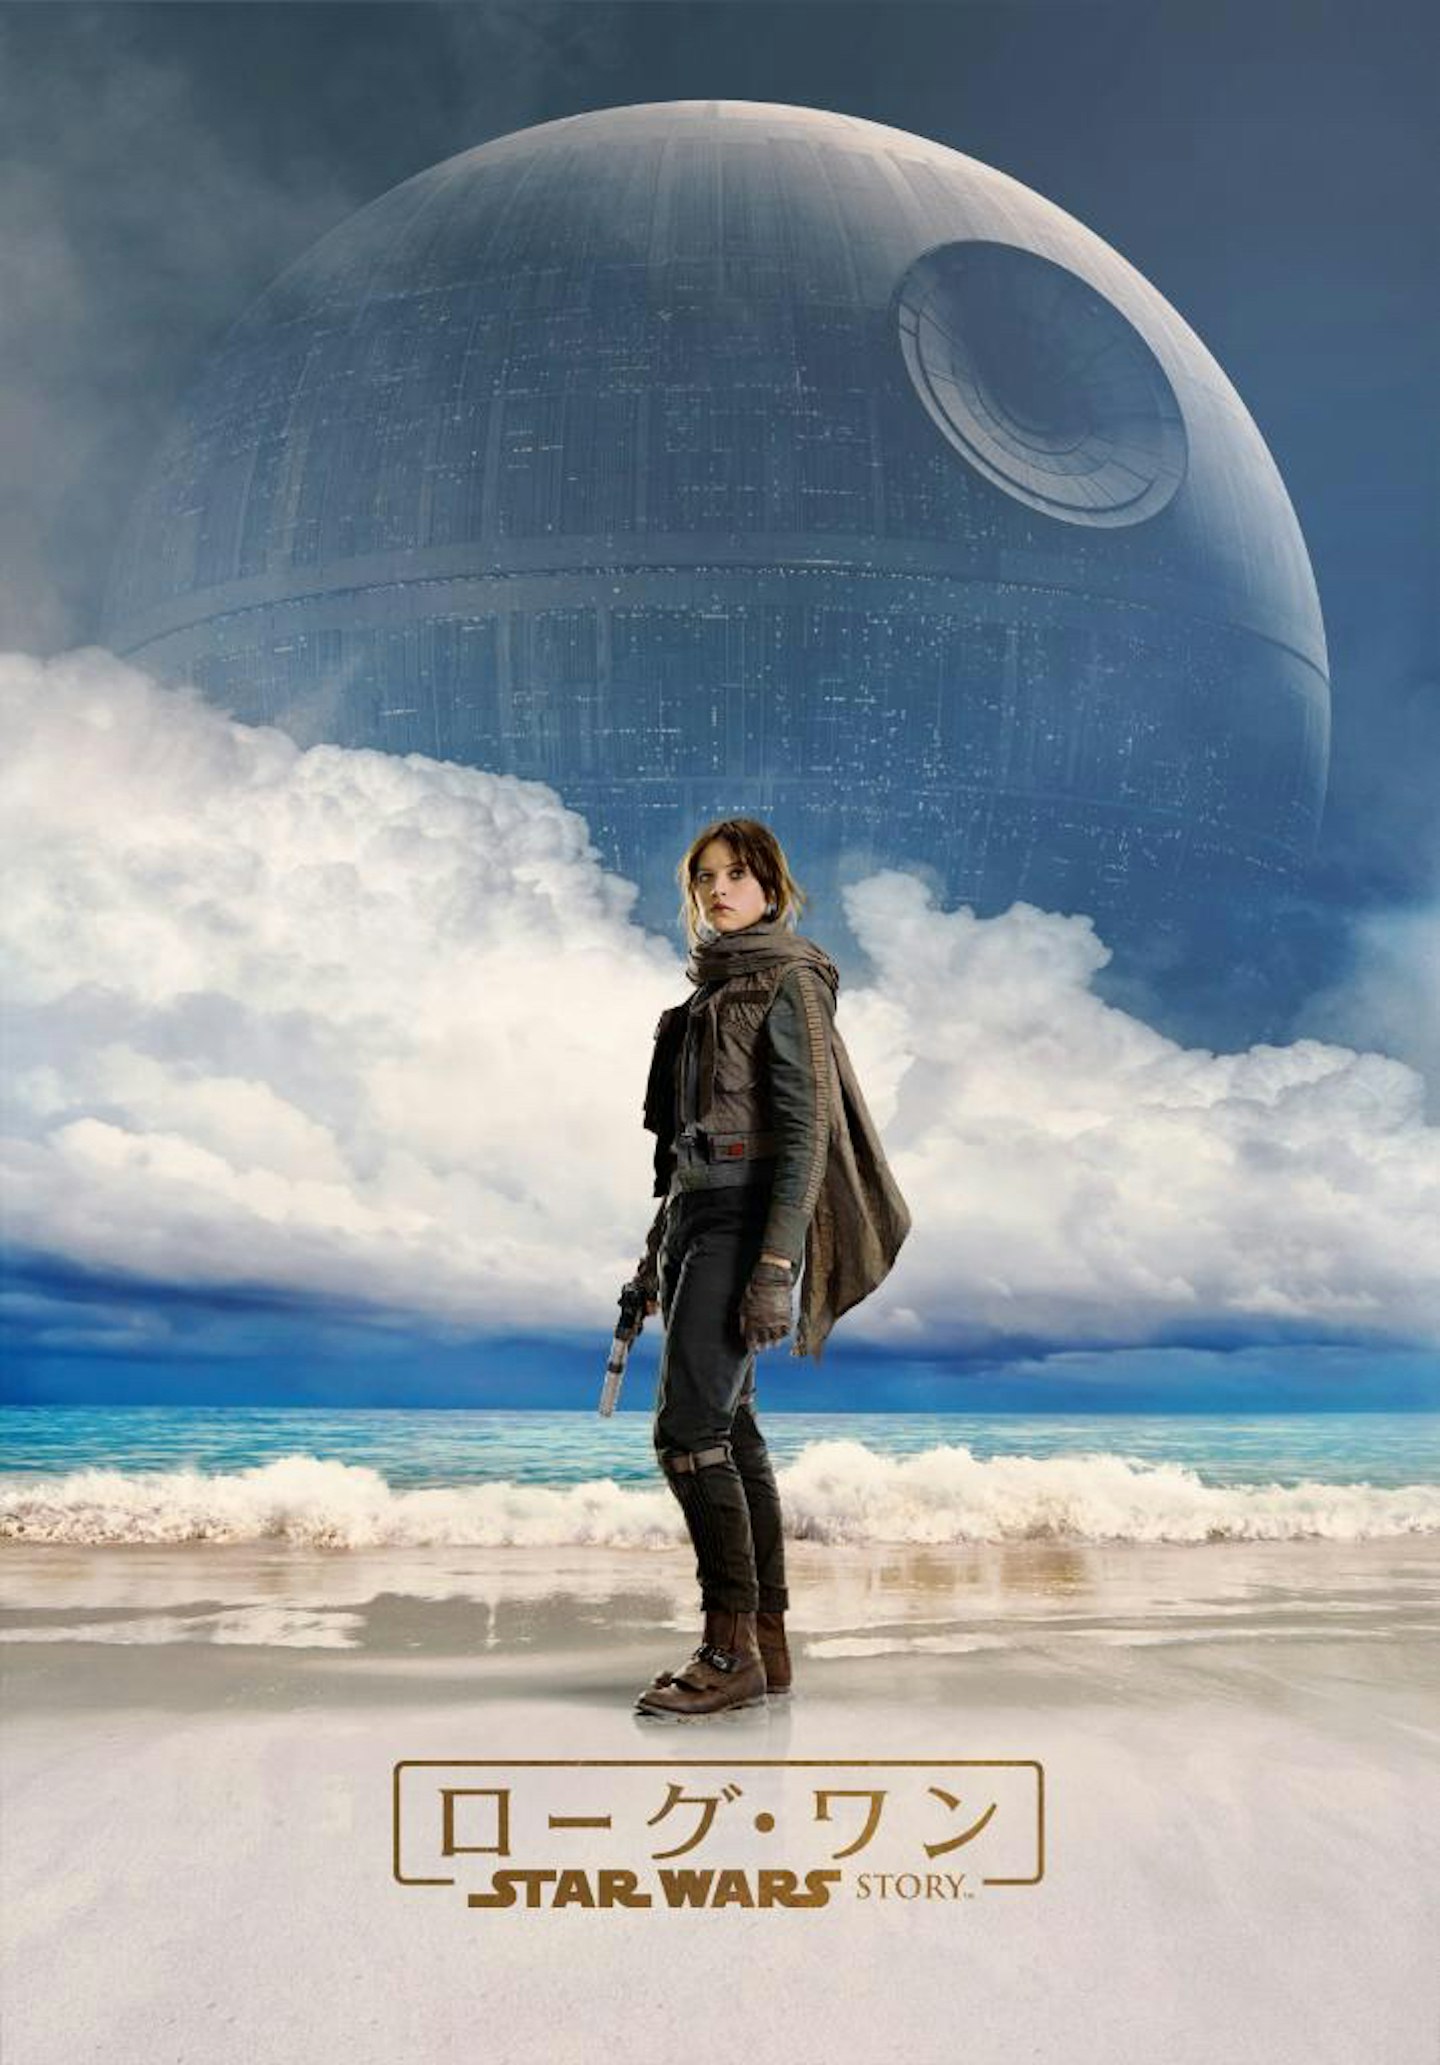 Rogue One: A Star Wars Story international posters